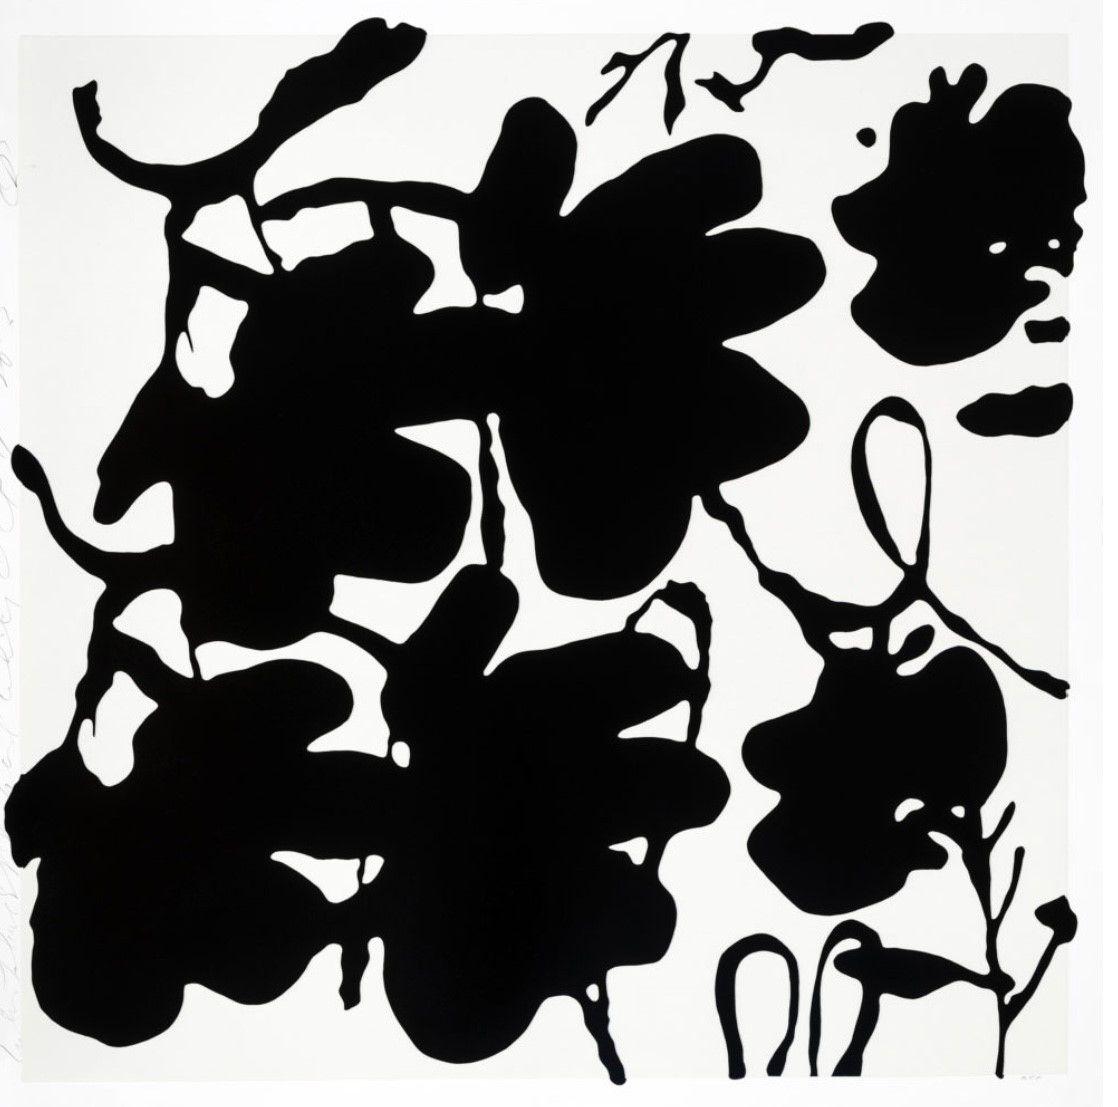 Donald Sultan Abstract Print - Lantern Flowers  BLACK AND WHITE, OCT 4, 2017